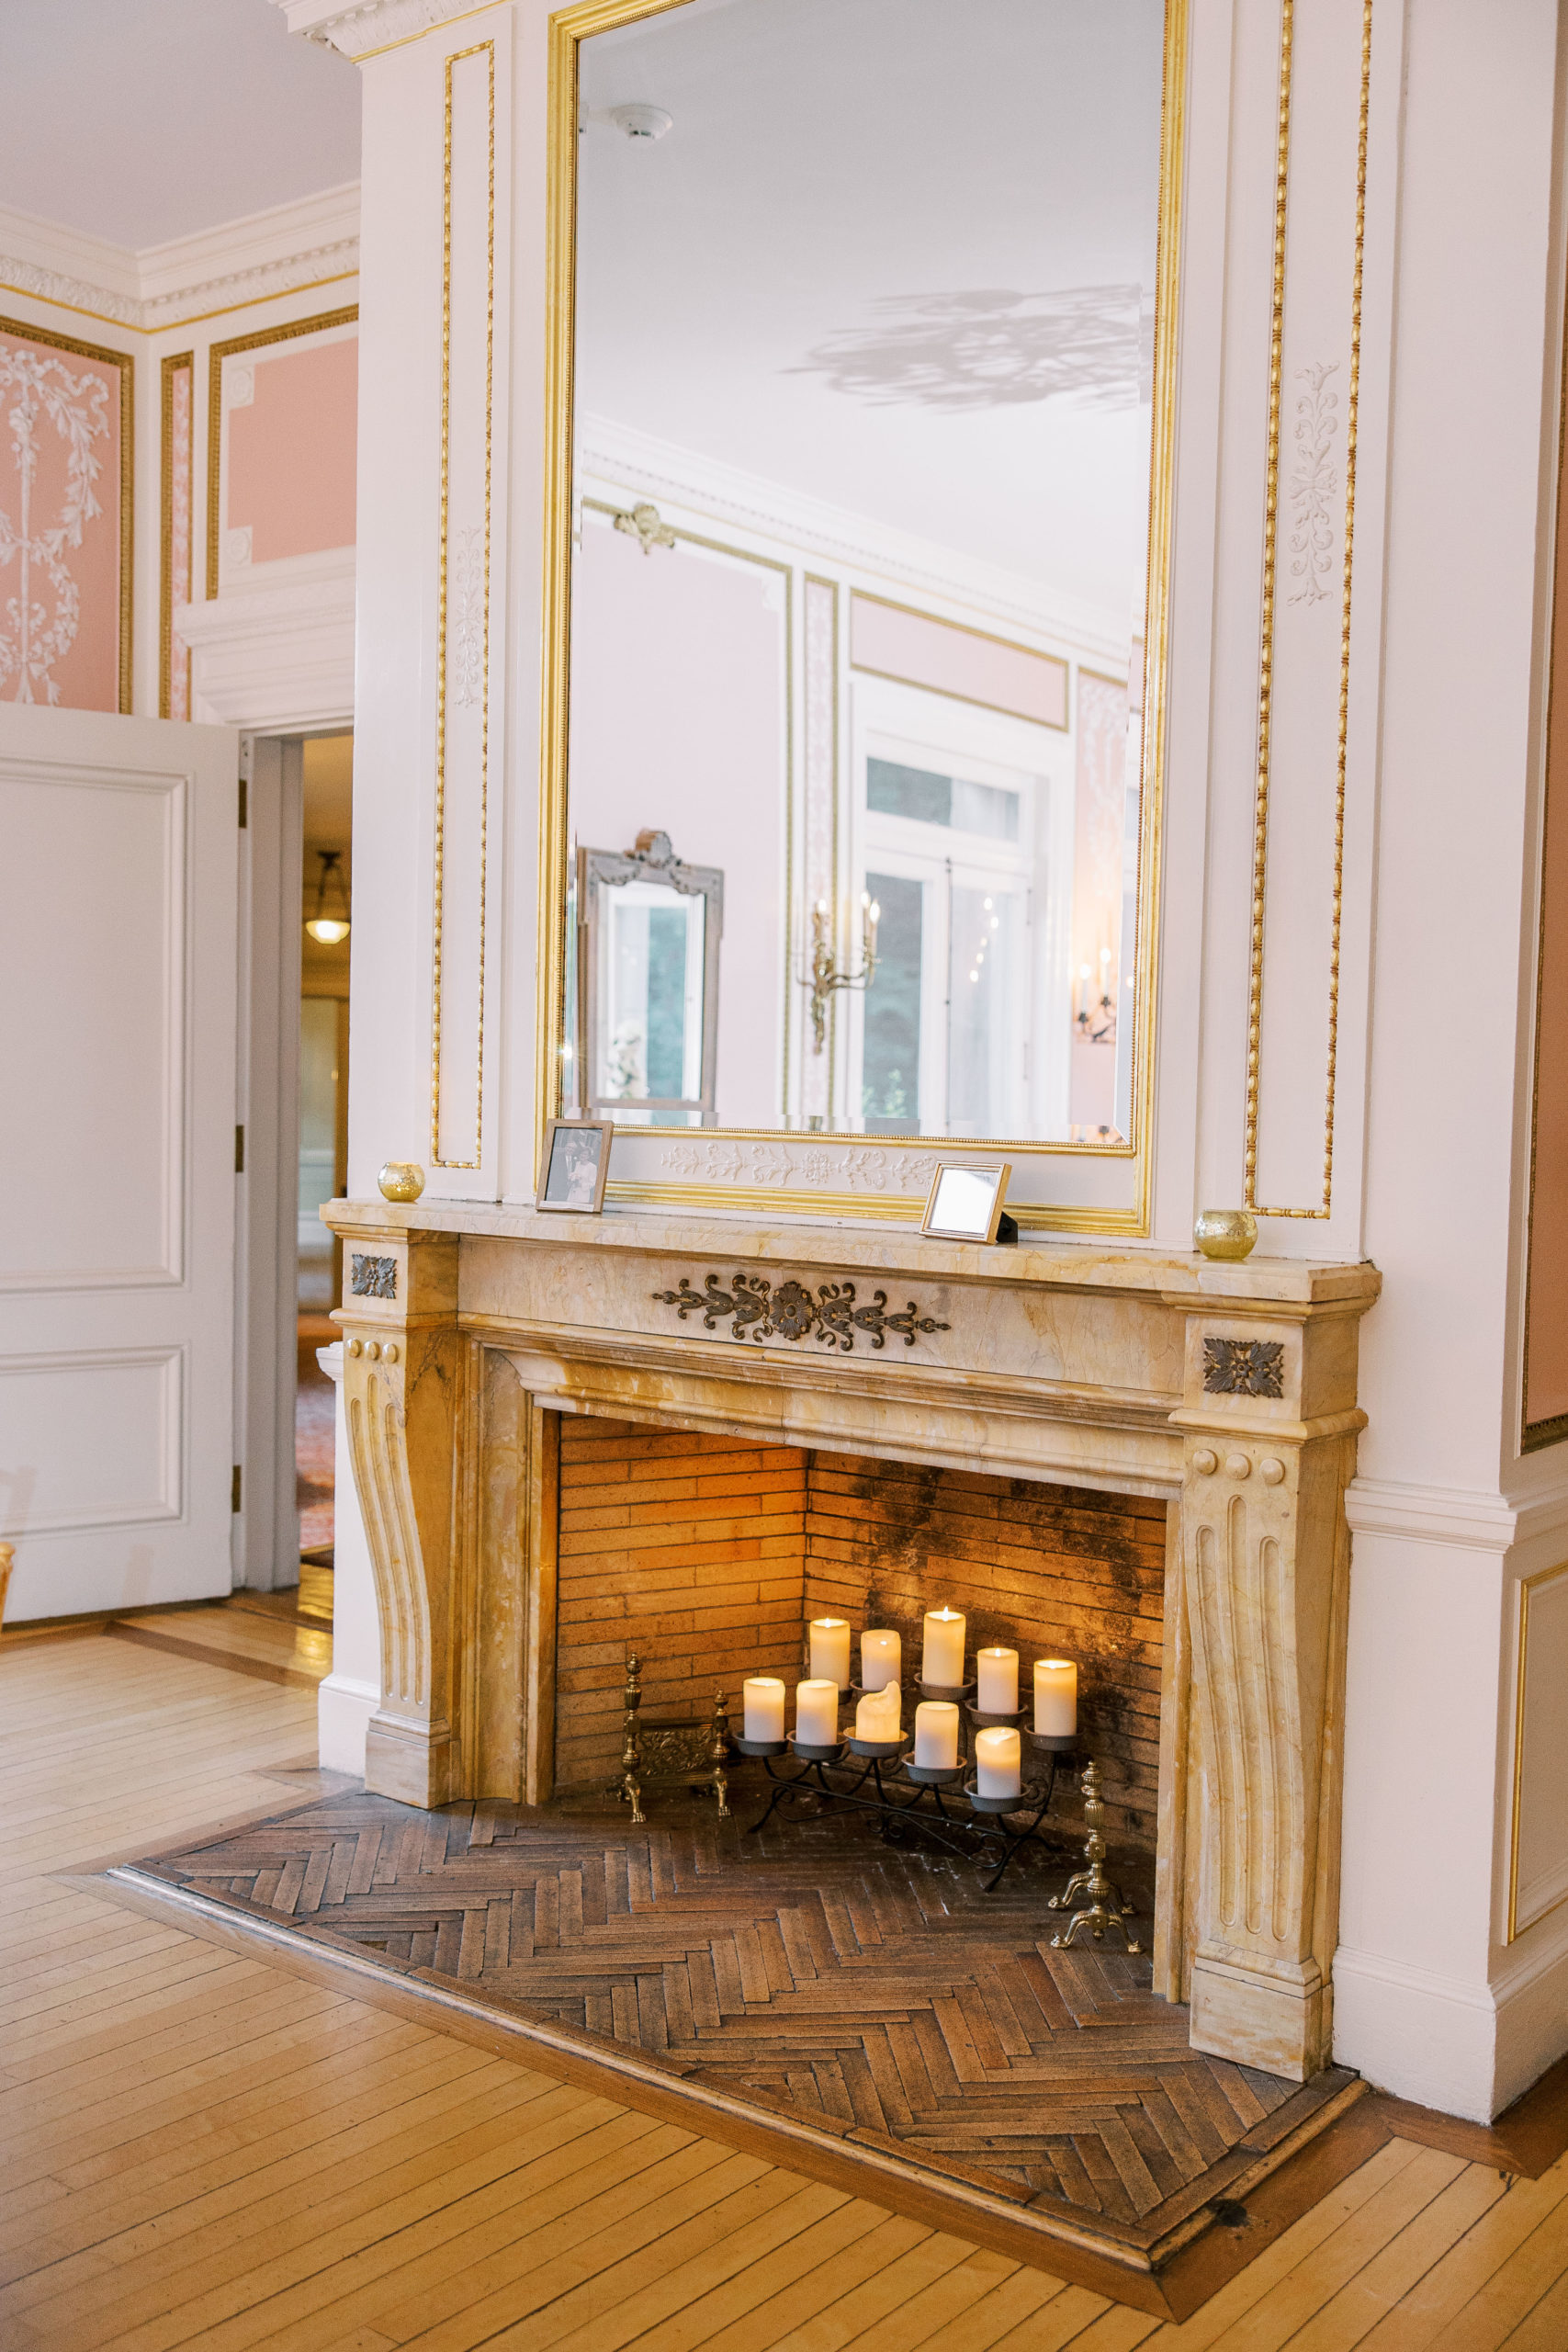 Stone fireplace with gold framed mirror and candles 